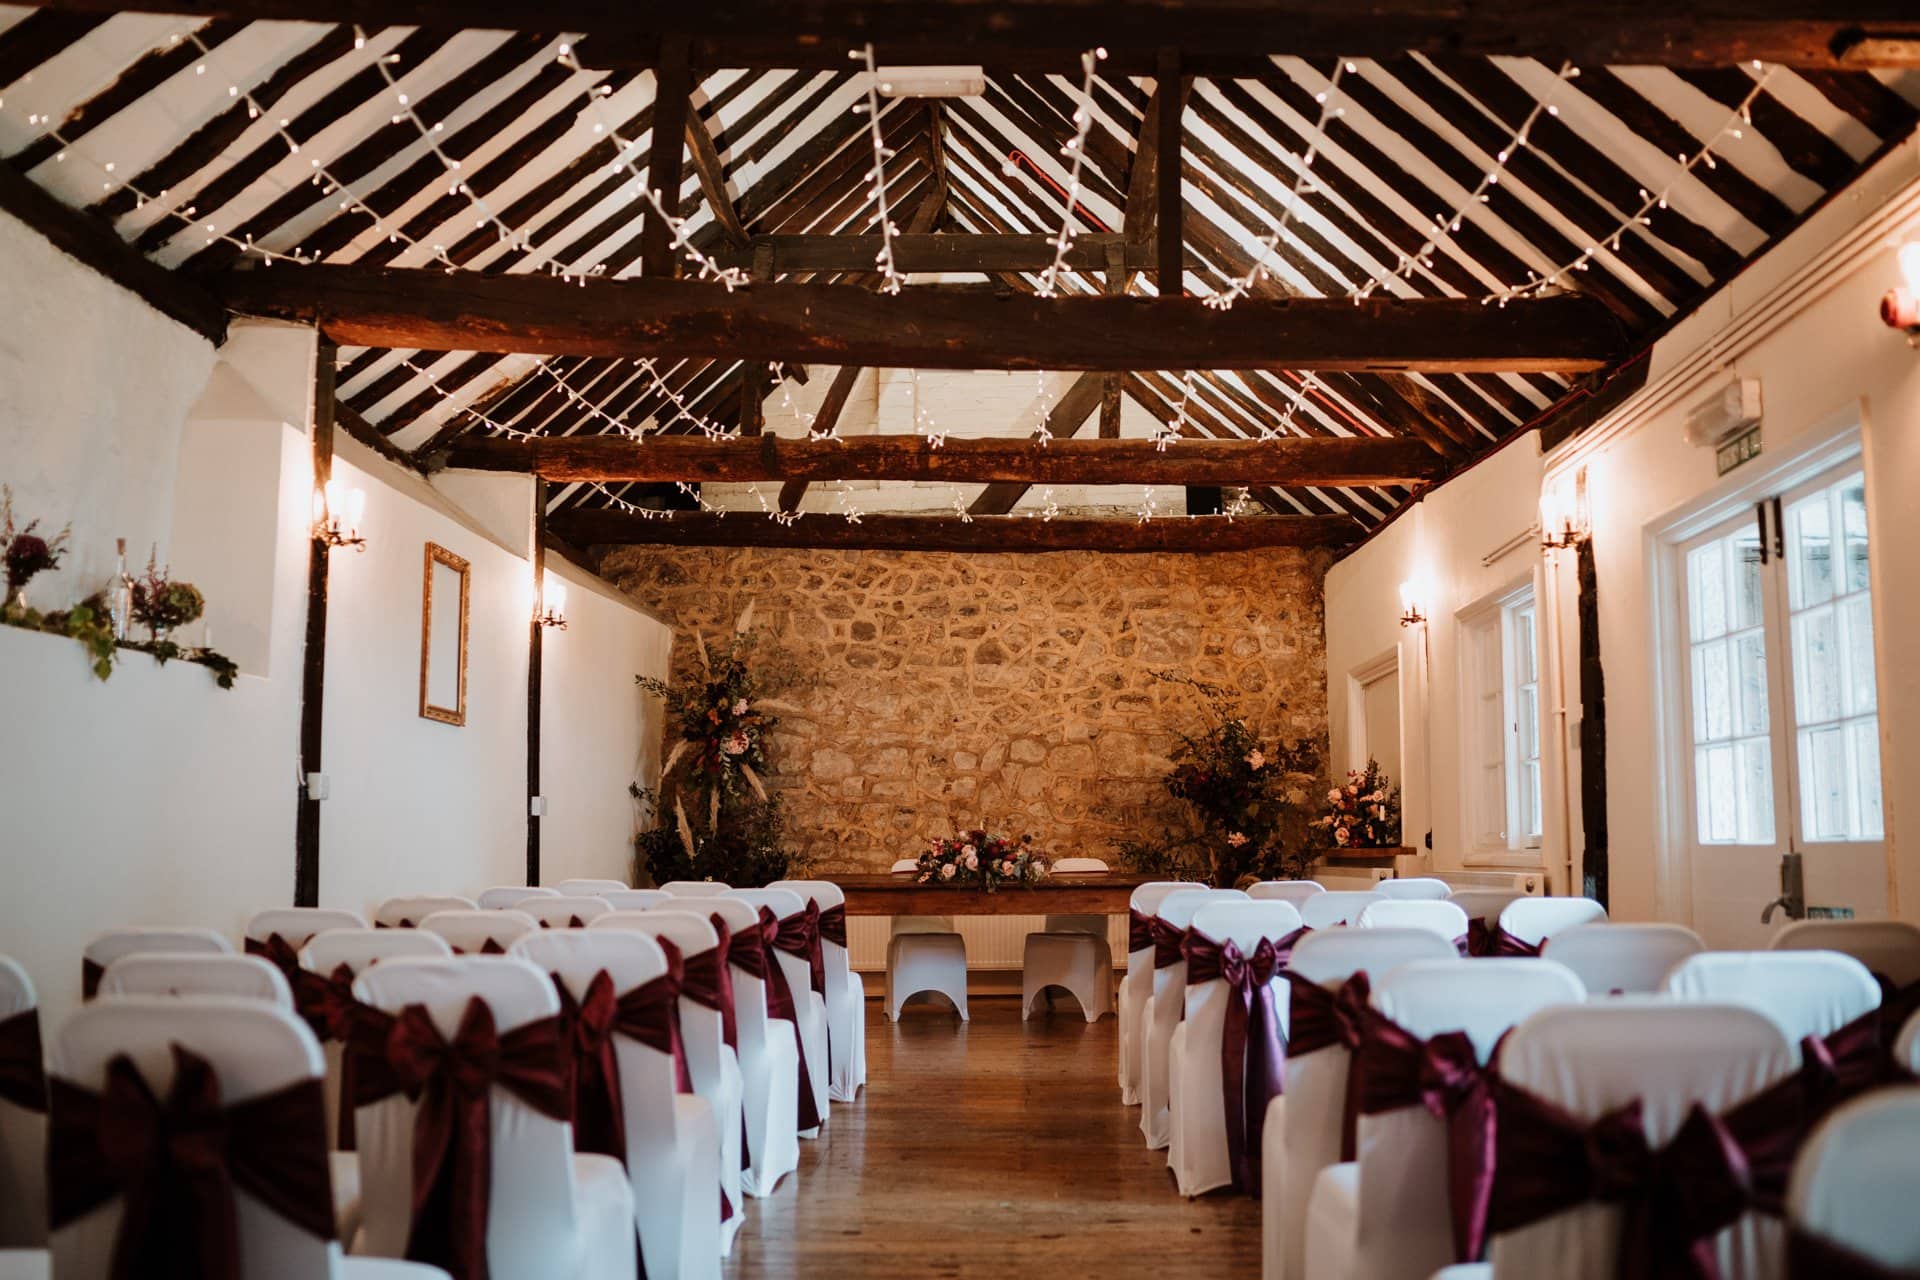 The Buttery wedding ceremony room at The Bull Hotel set for a ceremony with white char covers and burgundy sashes.